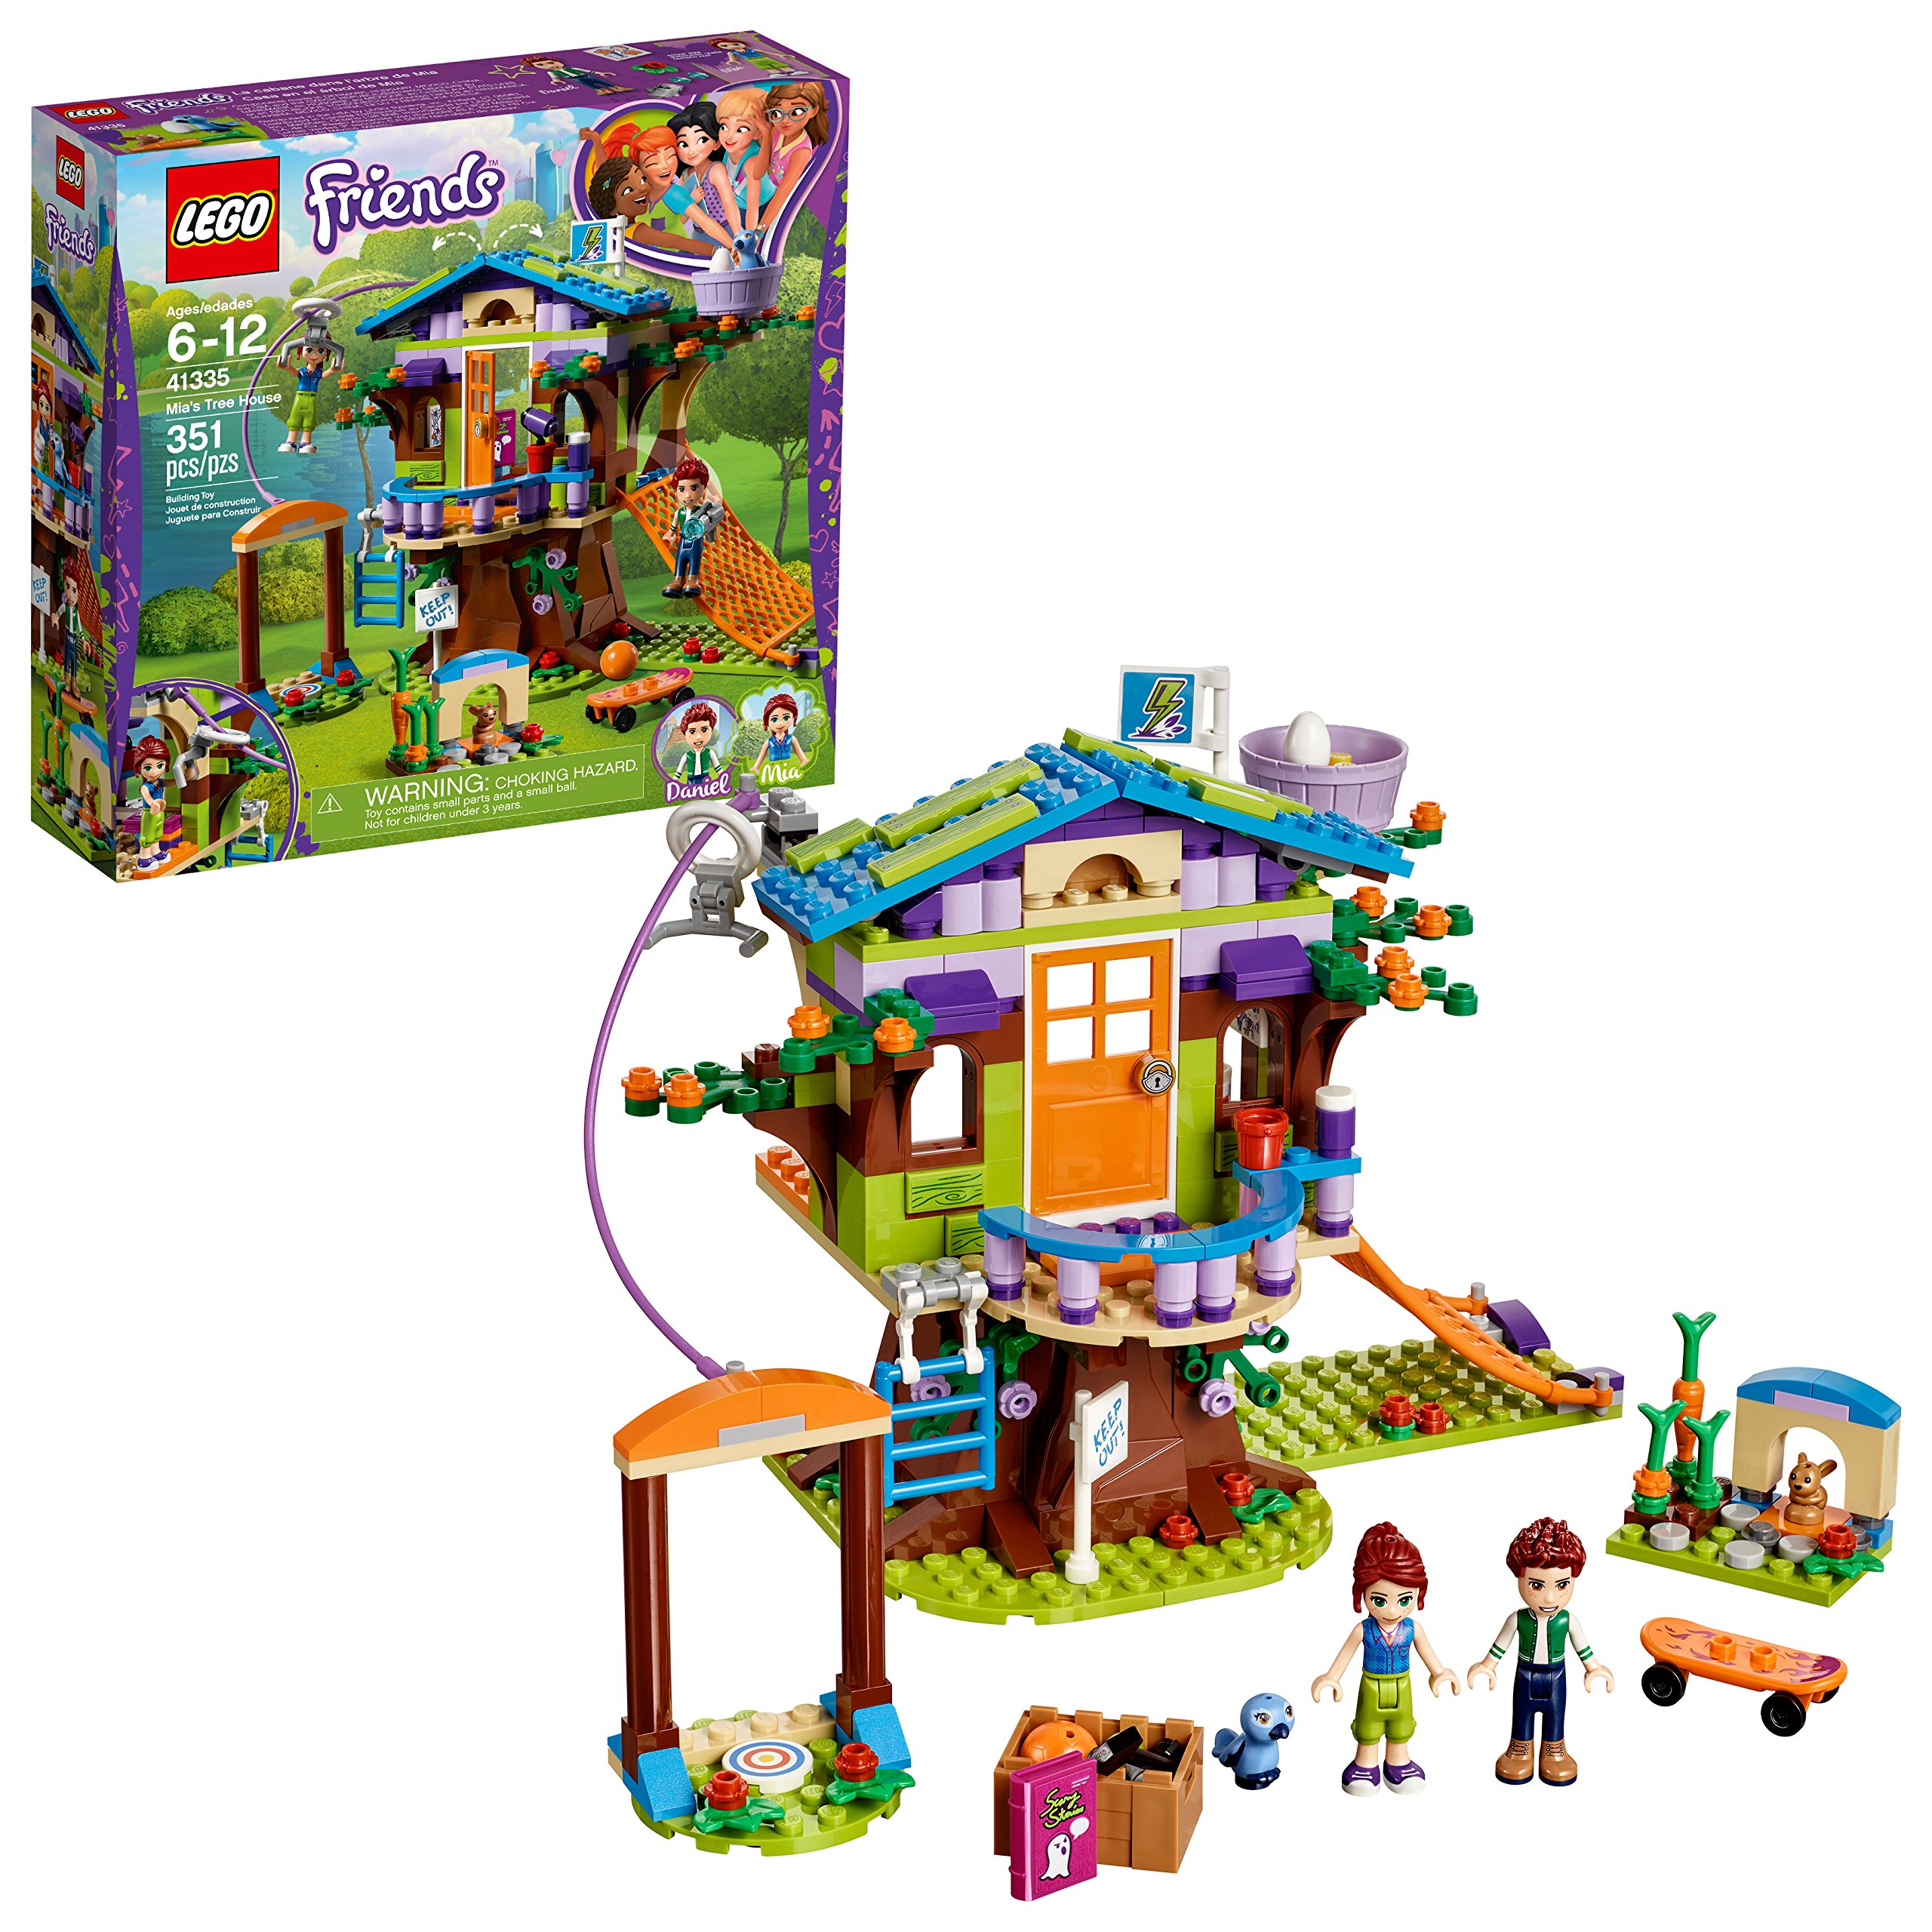 Book Cover LEGO Friends Mia's Tree House 41335 Creative Building Toy Set for Kids, Best Learning and Roleplay Gift for Girls and Boys (351 Pieces)